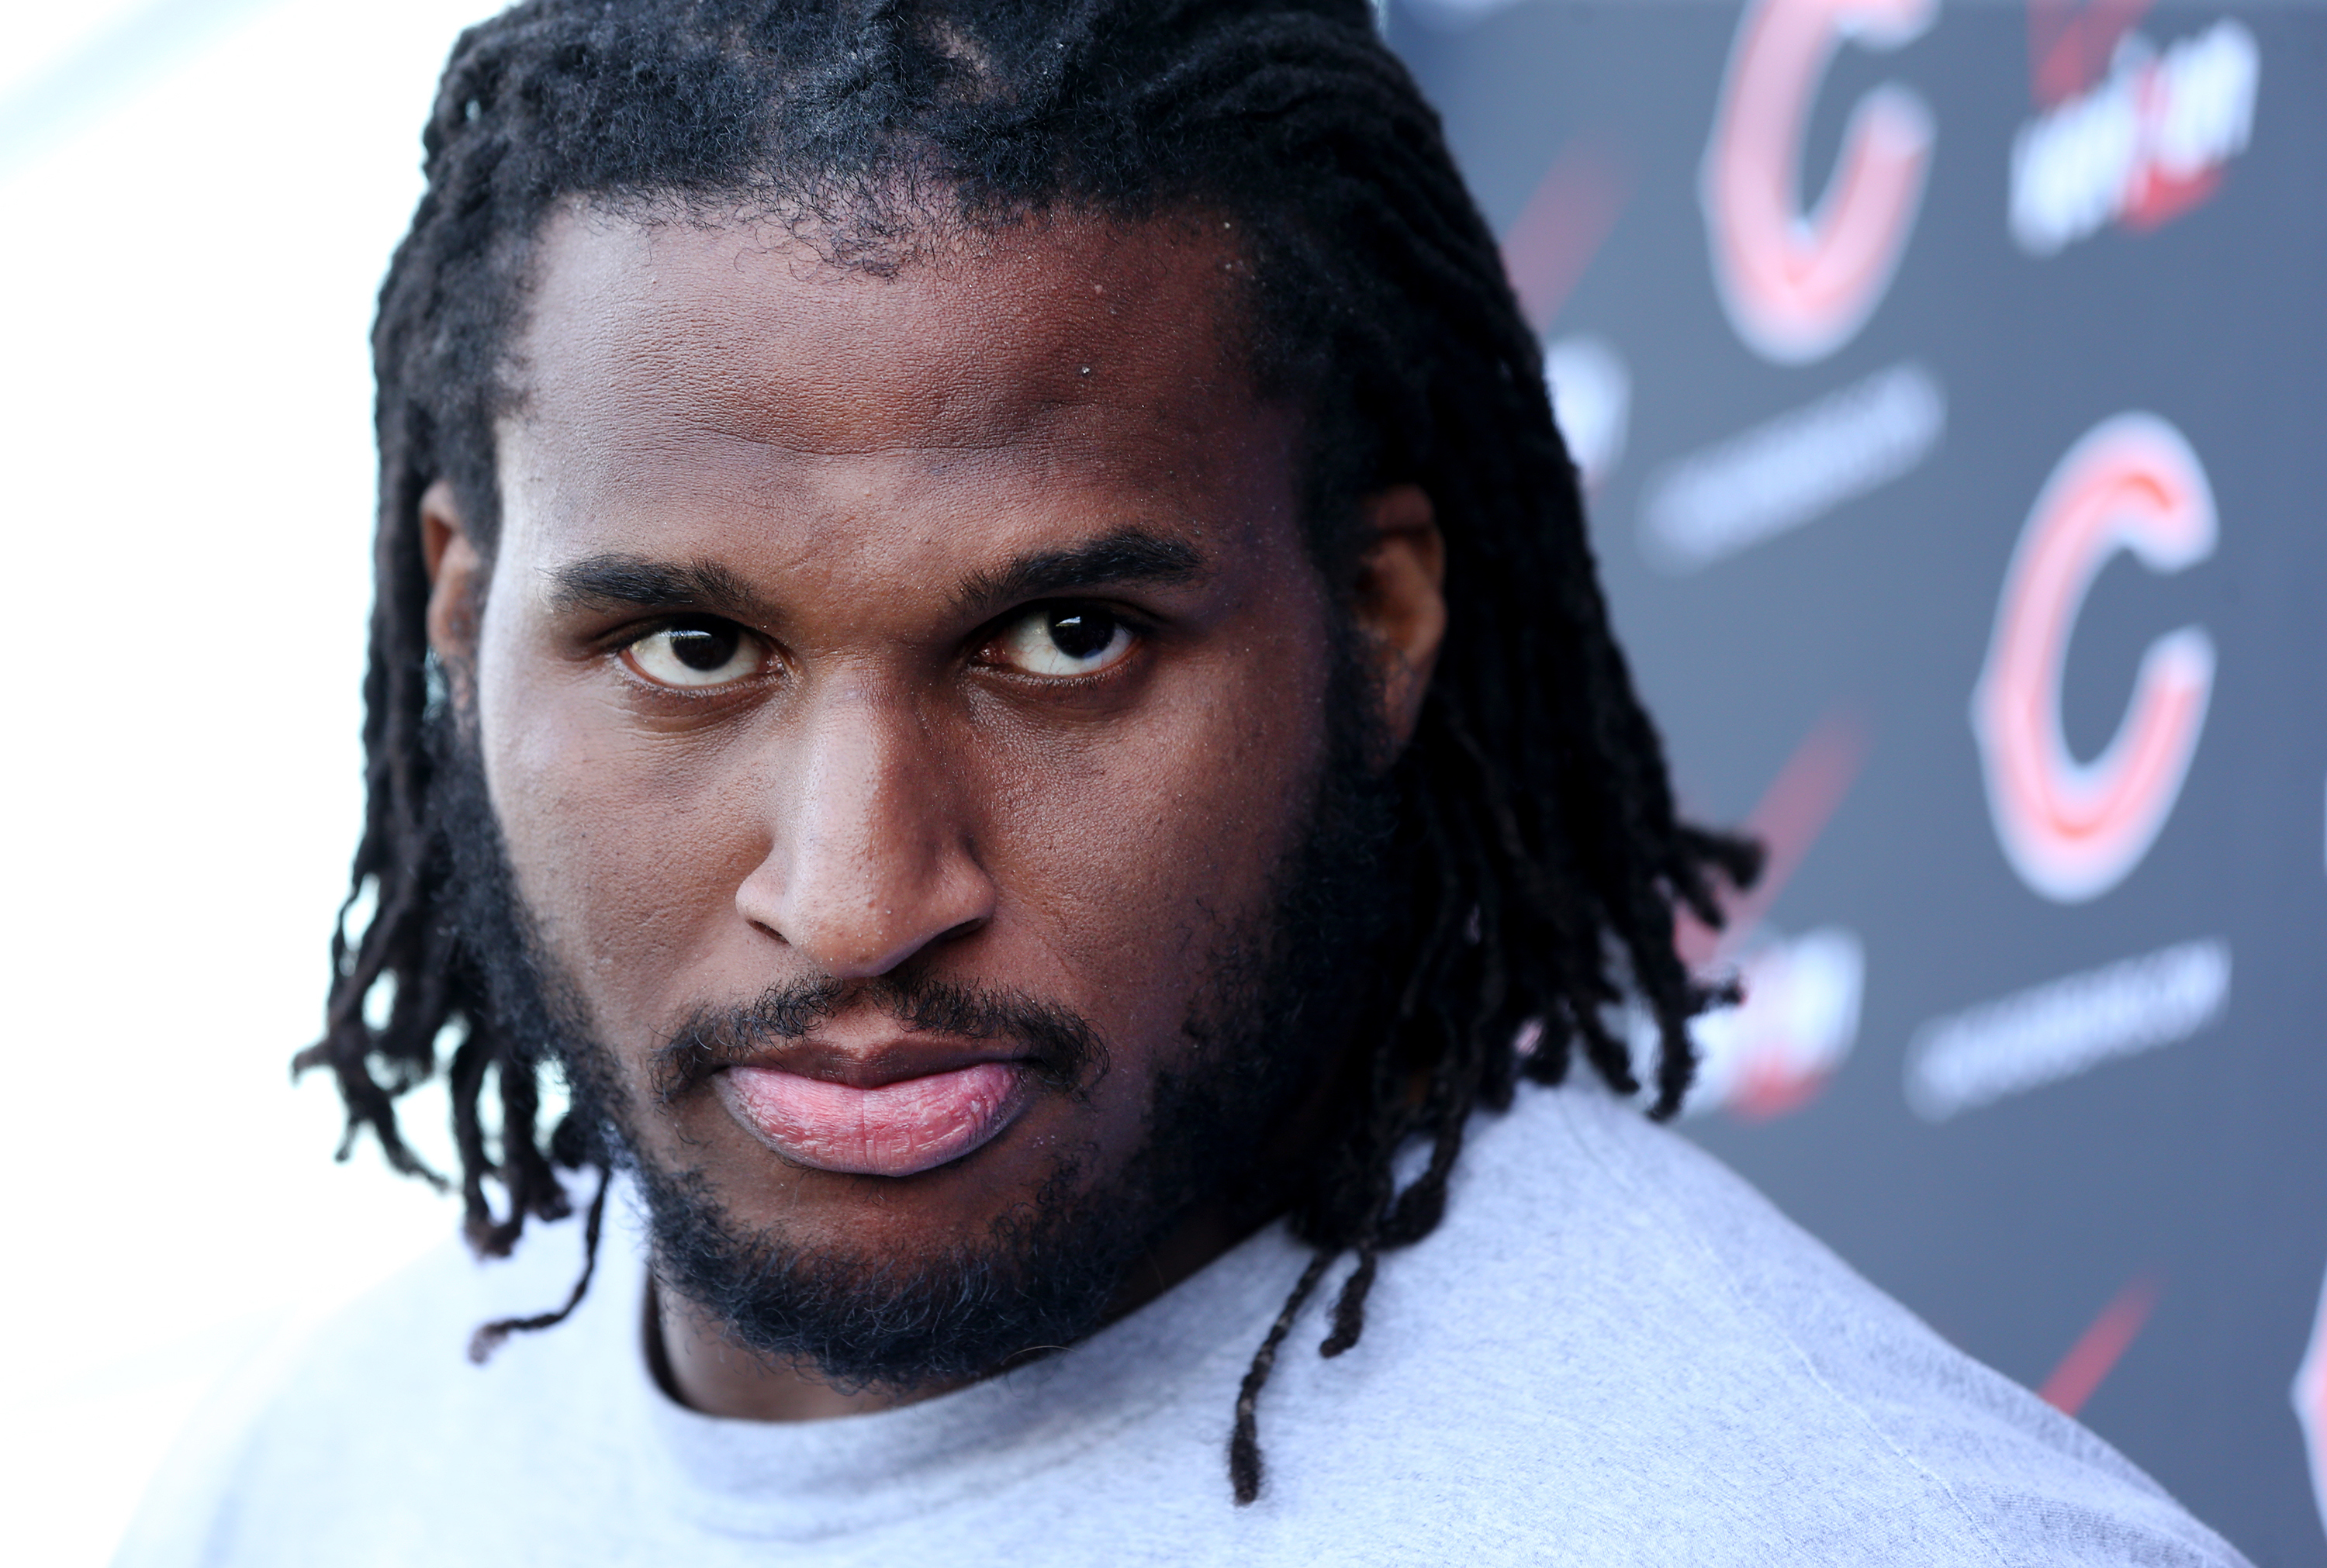 Chicago Bears defensive tackle Ray McDonald speaks with the media after minicamp on Tuesday, April 28, 2015, at Halas Hall in Lake Forest, Ill. The team released McDonald after he was arrested Monday on a domestic violence charge. (Chris Sweda—Chicago Tribune/TNS via Getty Images)